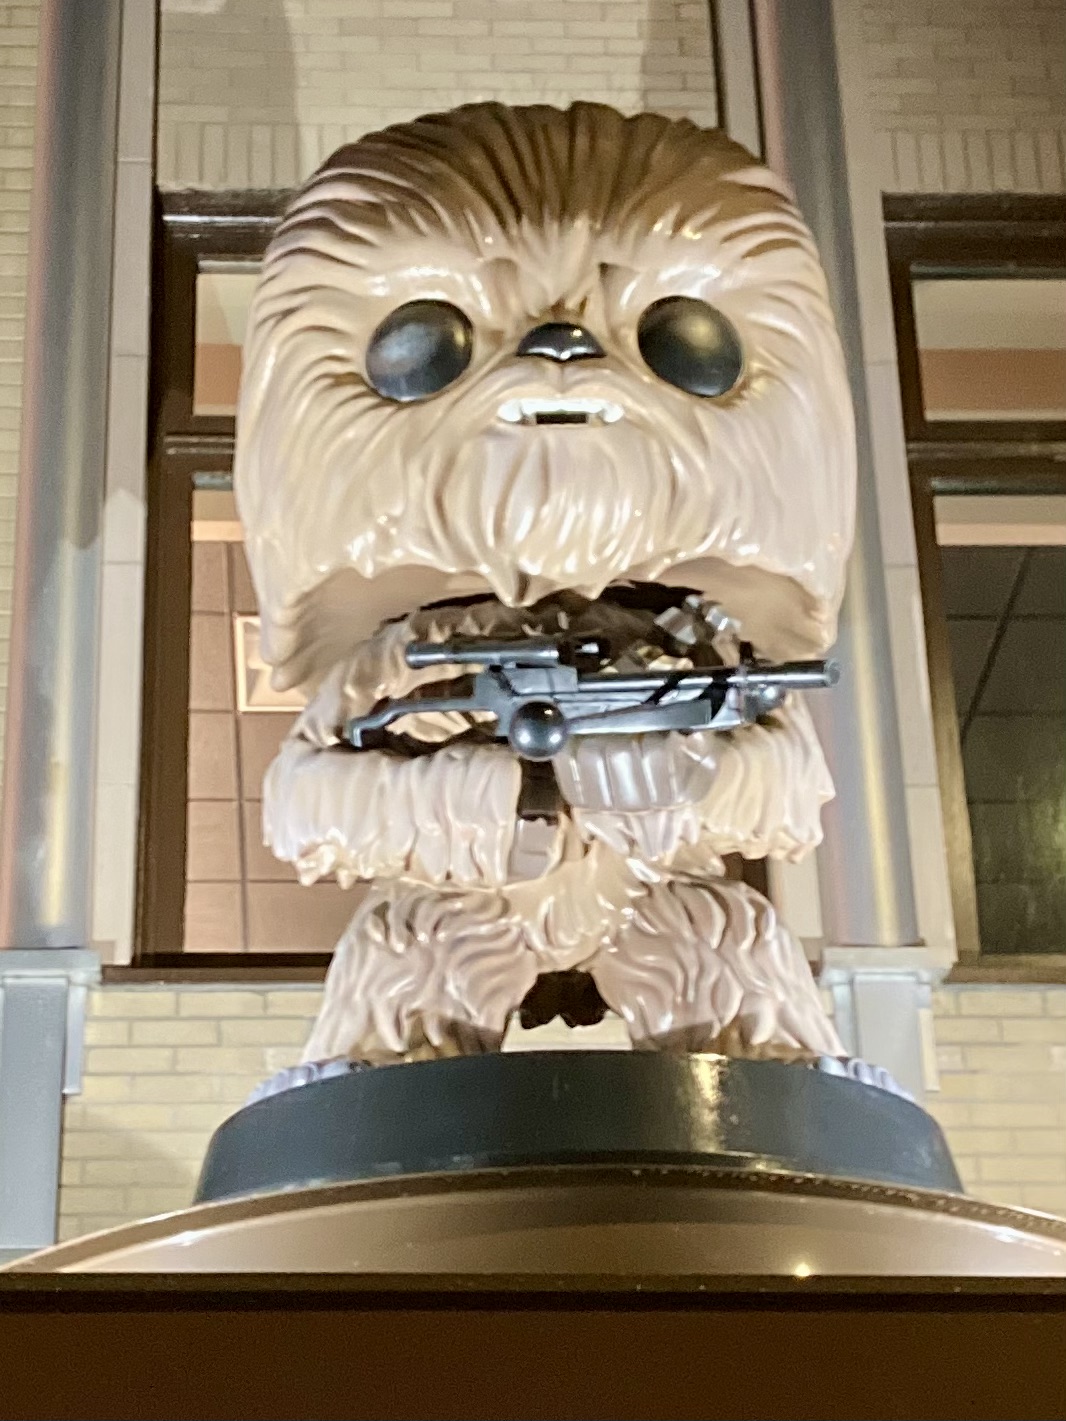 Giant Chewbacca on Funko Store building in Everett